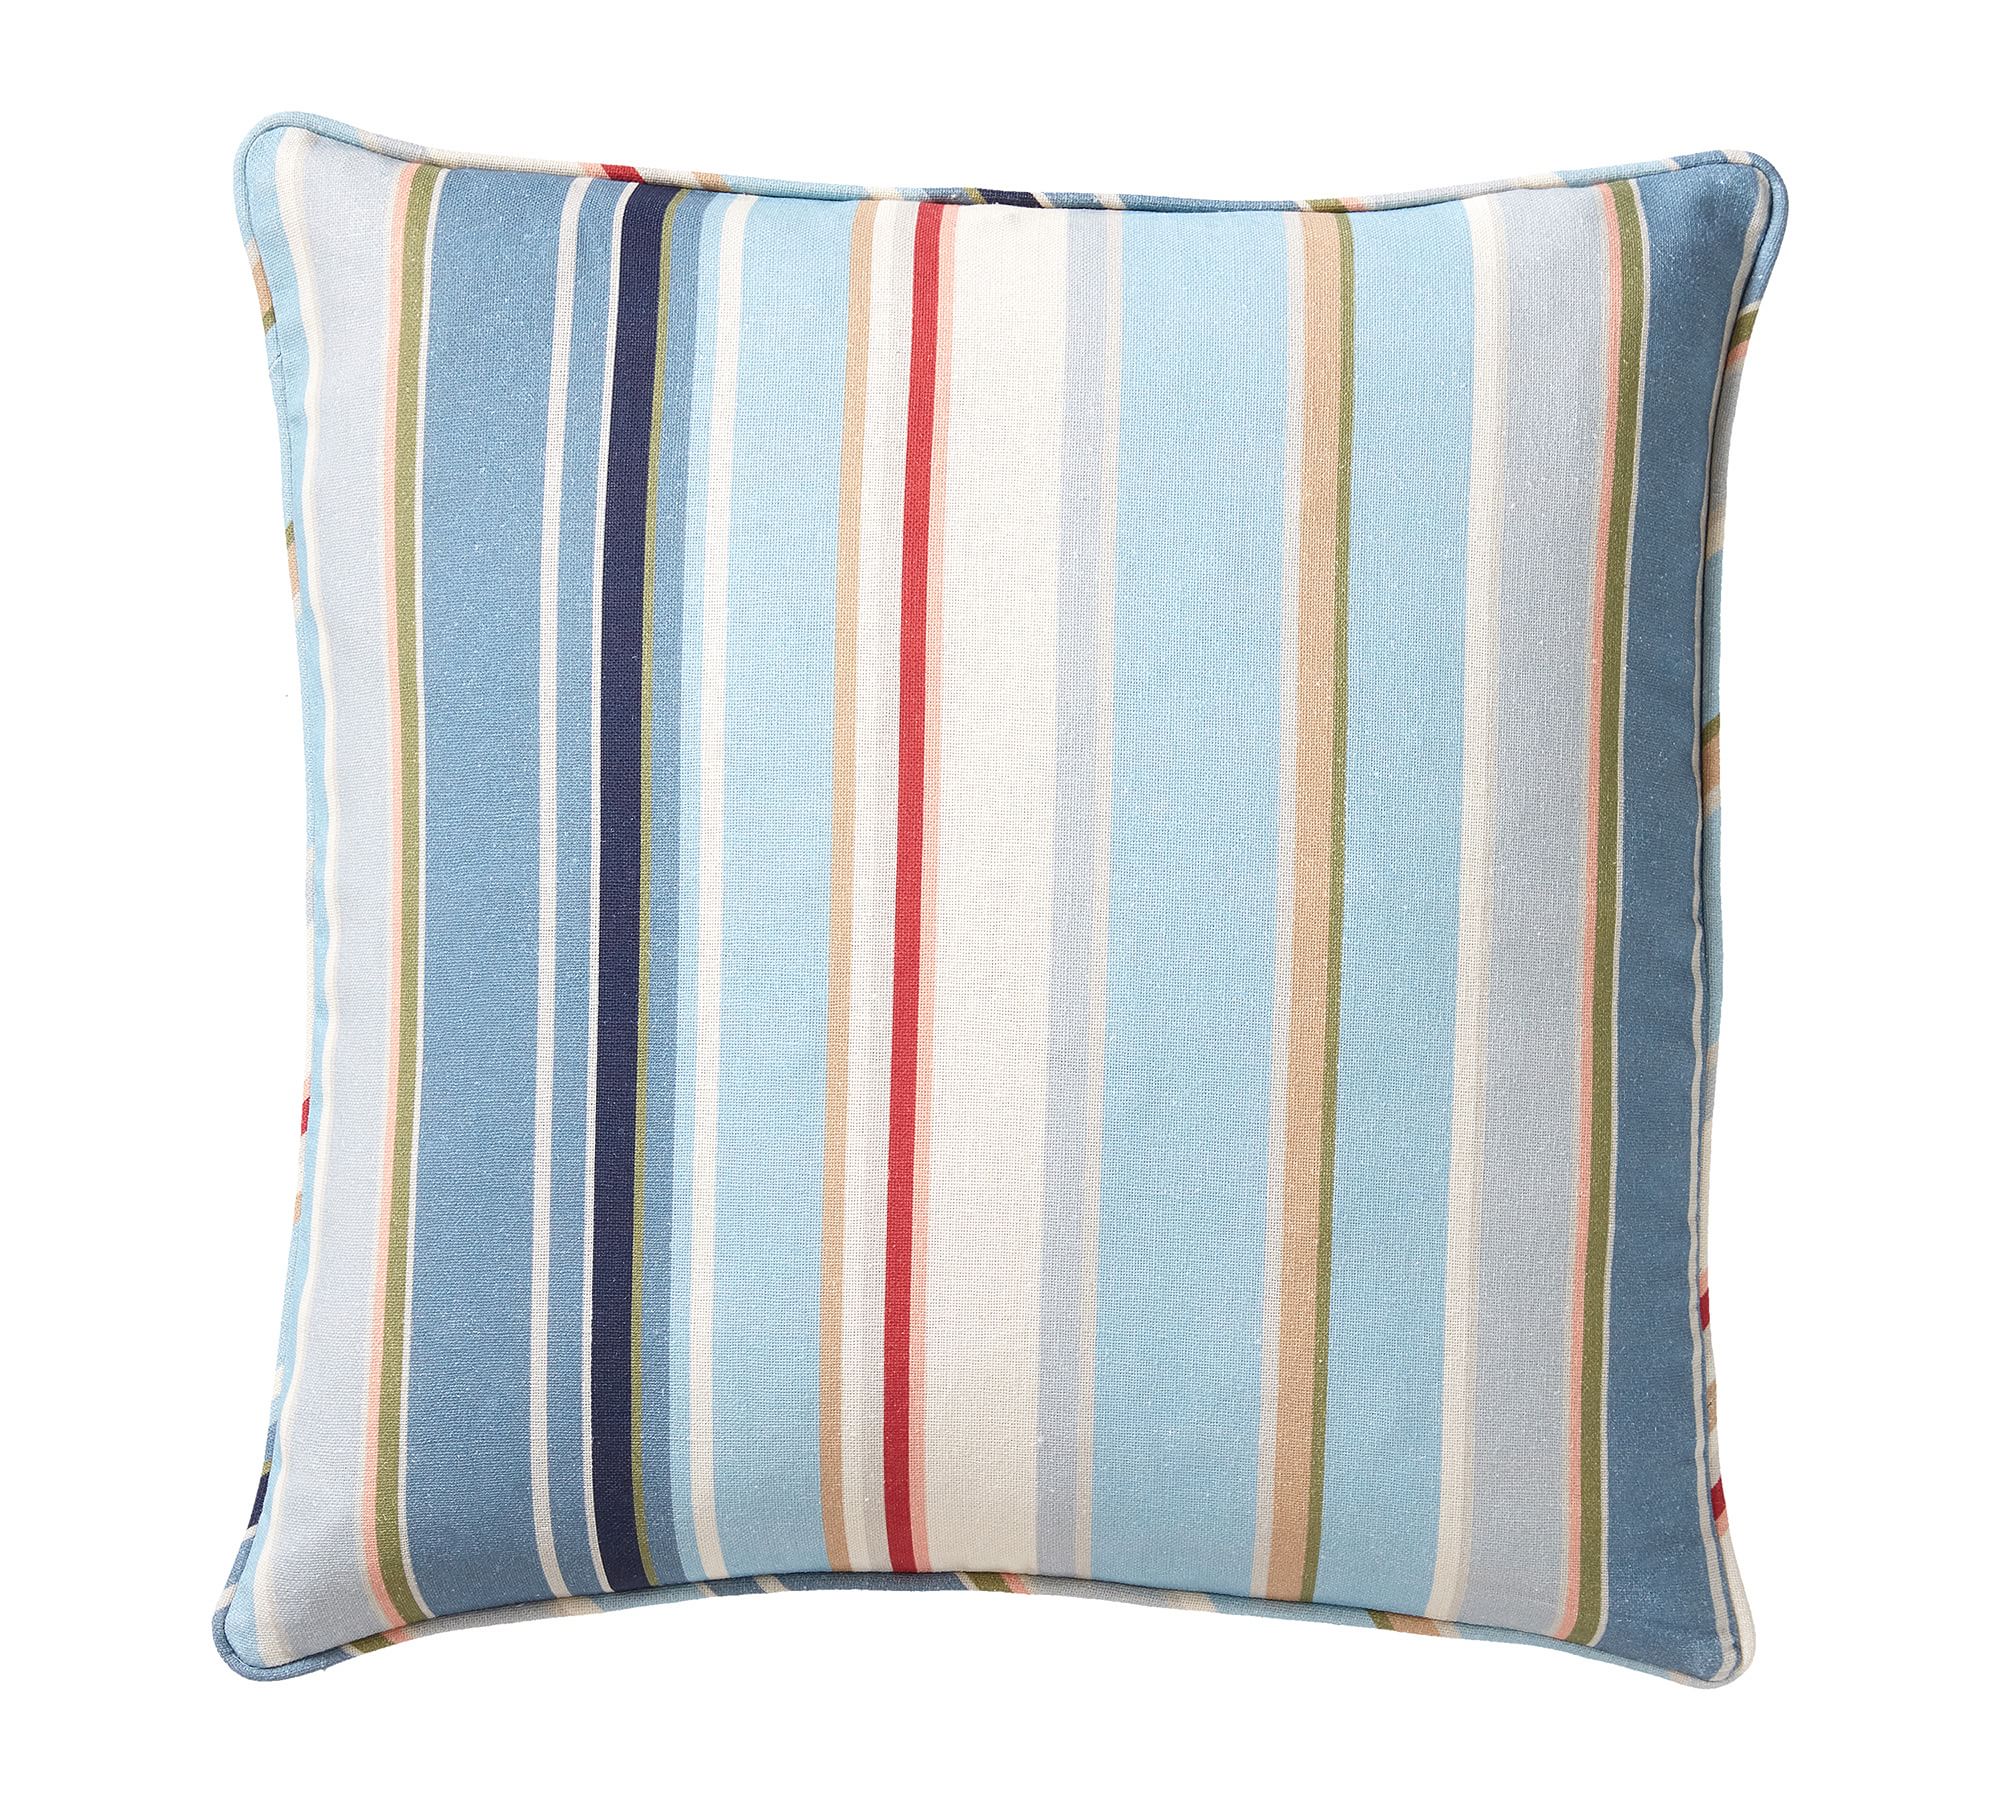 Lisi Striped Pillow Cover